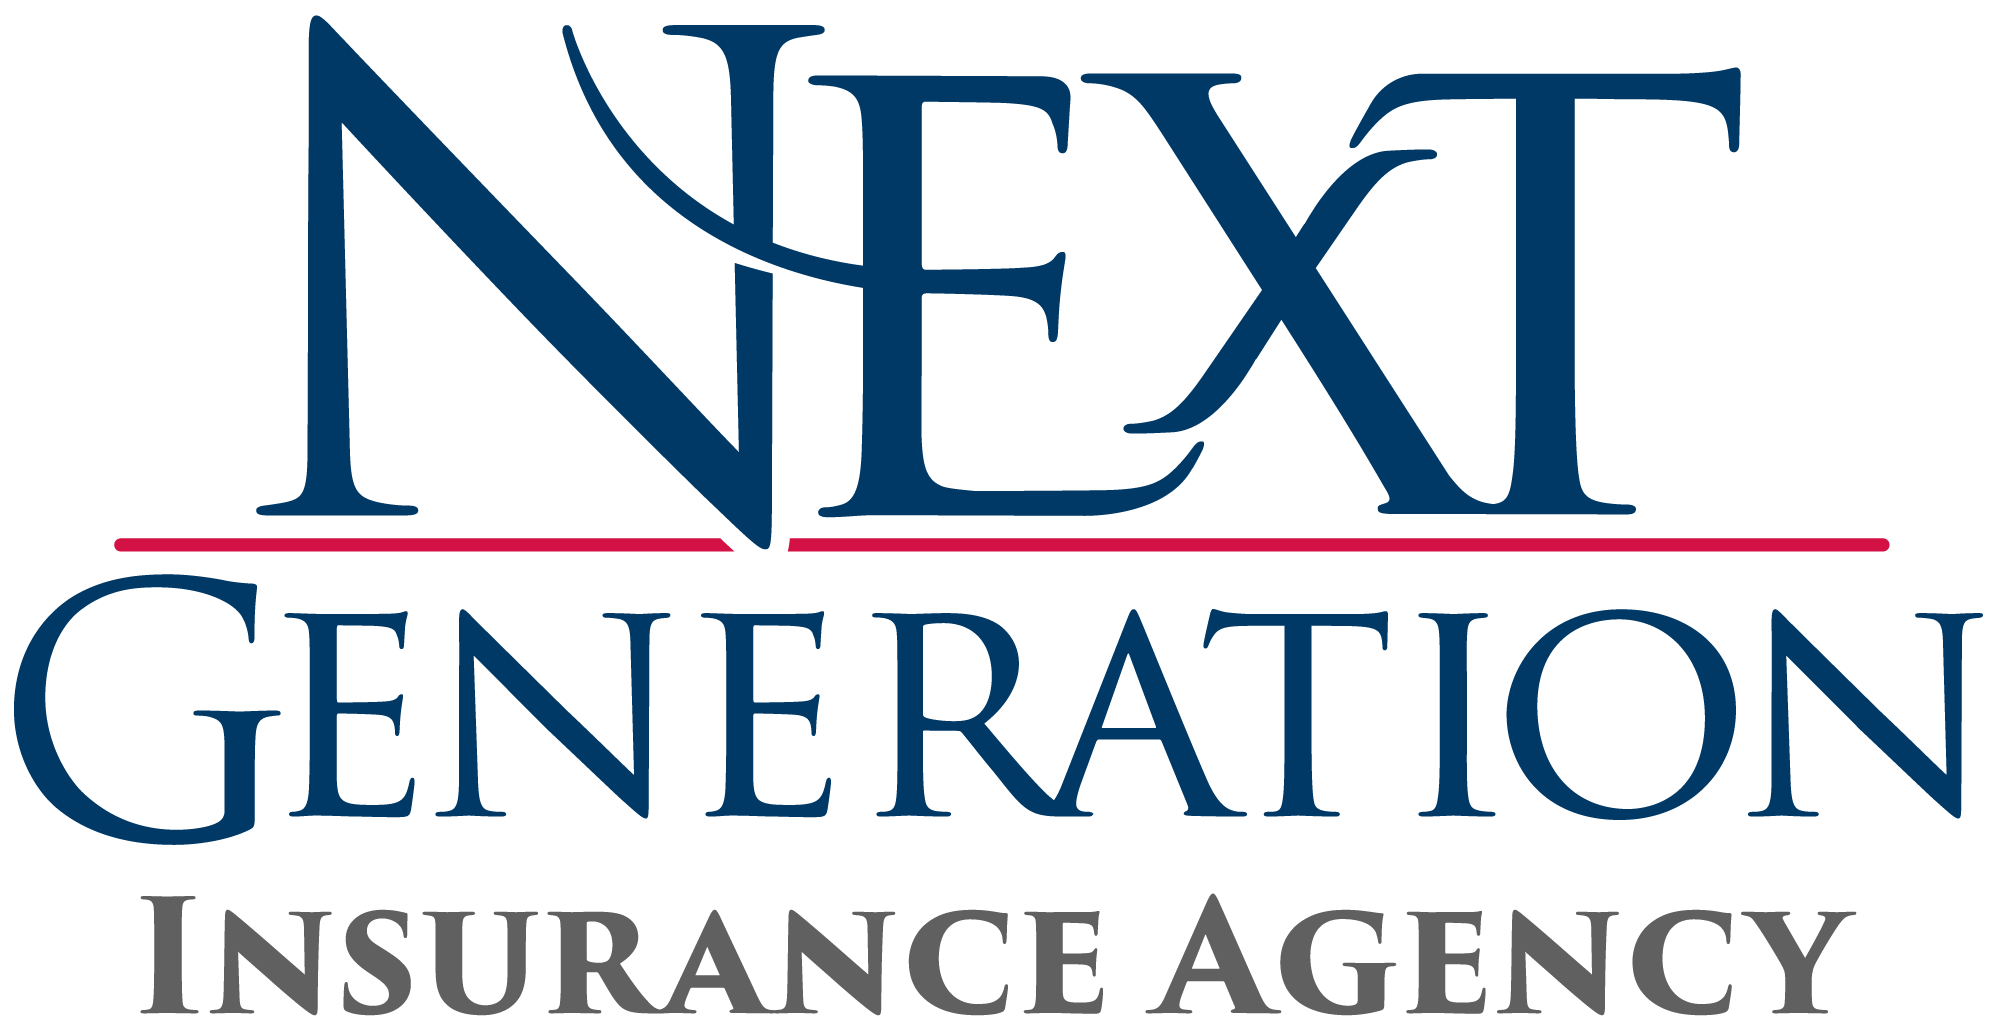 Home - Next Level Insurance Agency